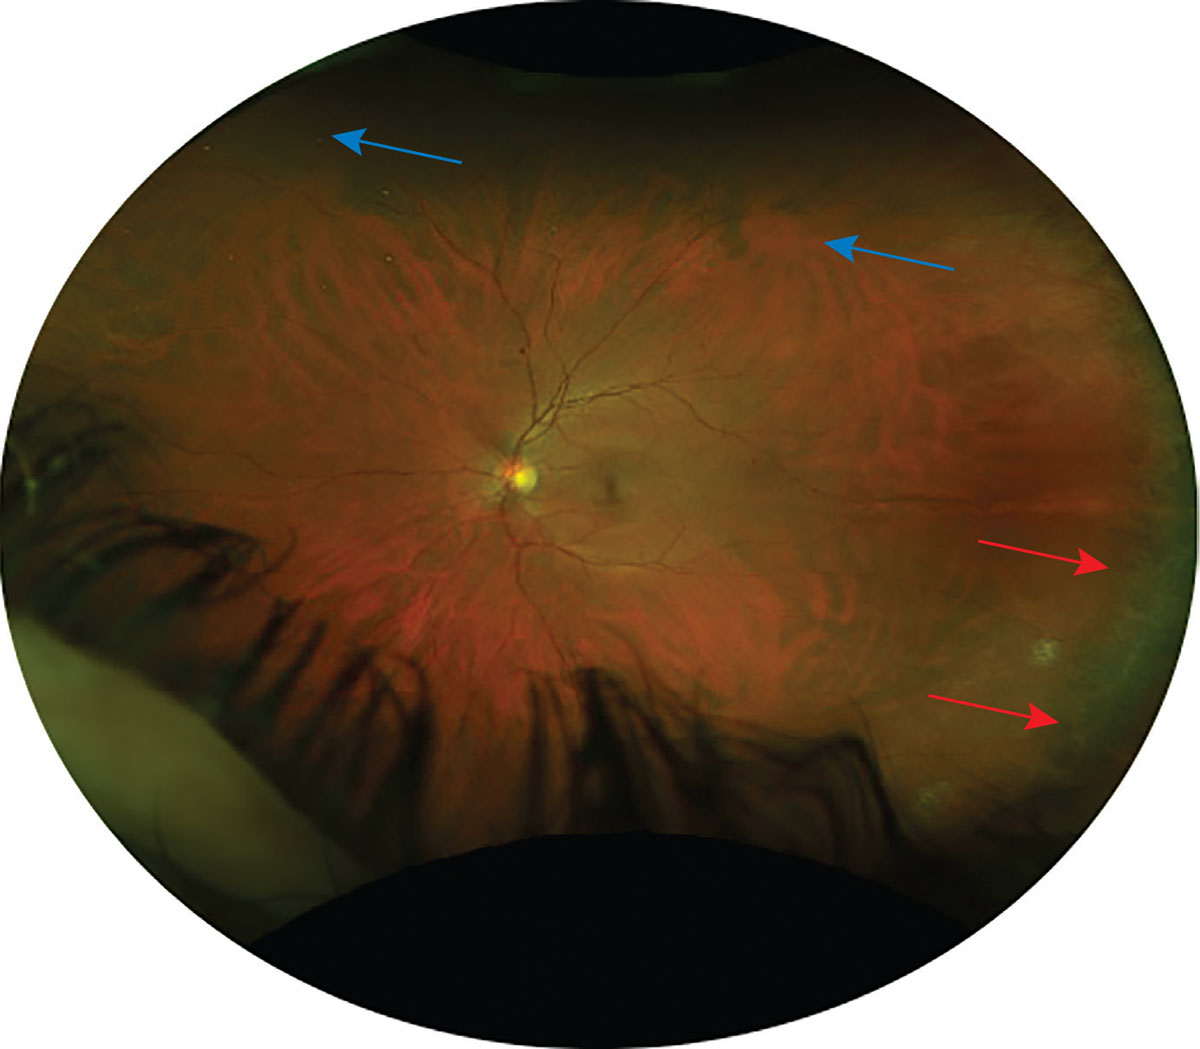 Fig. 2. This Optos photo shows an area of ora serrata at temporal retina (marked by red arrows) and the mid-peripheral vortex veins (marked by blue arrows). 